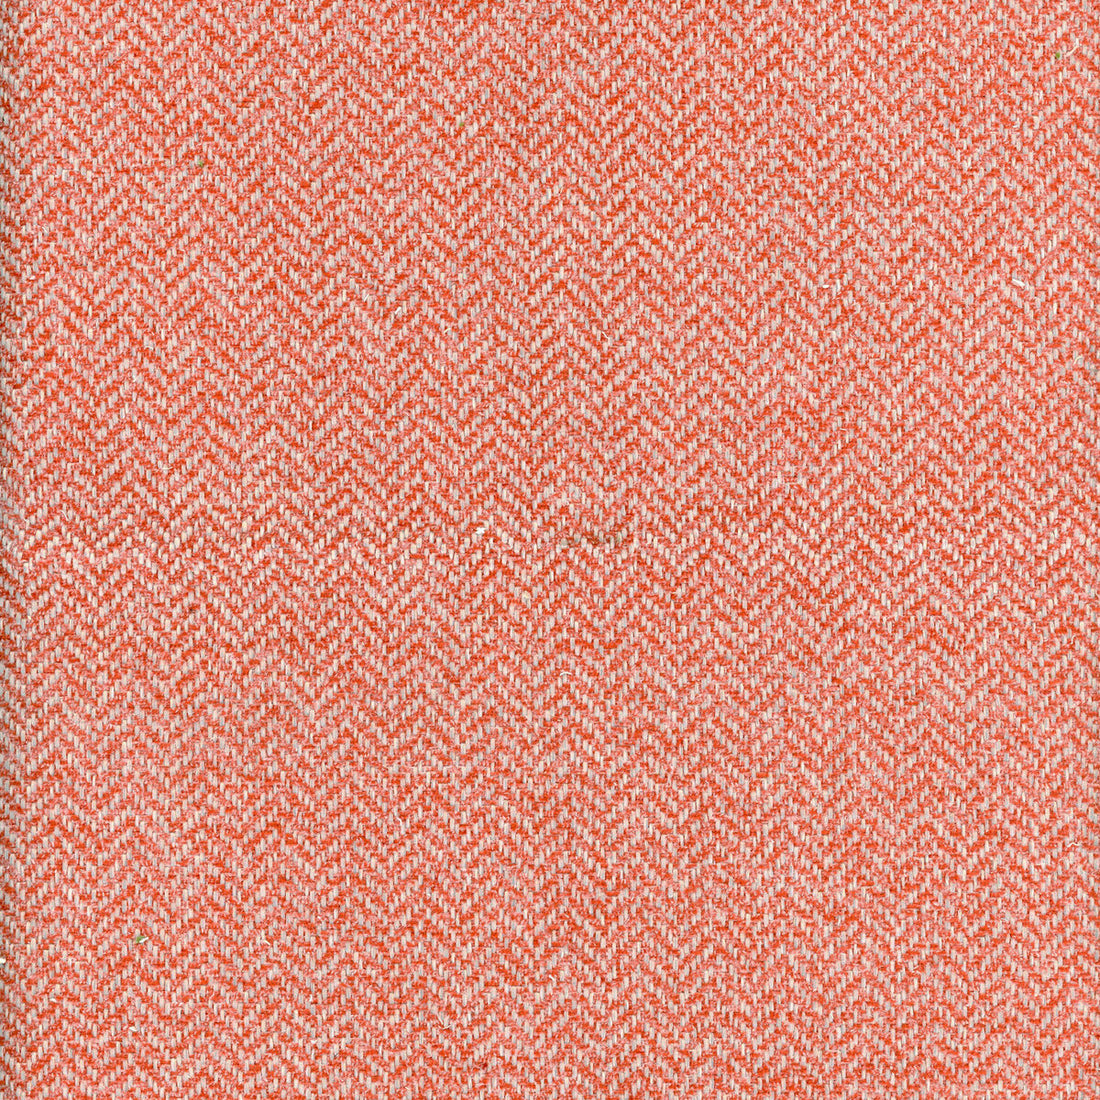 Nevada fabric in salmon color - pattern AM100329.19.0 - by Kravet Couture in the Andrew Martin Canyon collection